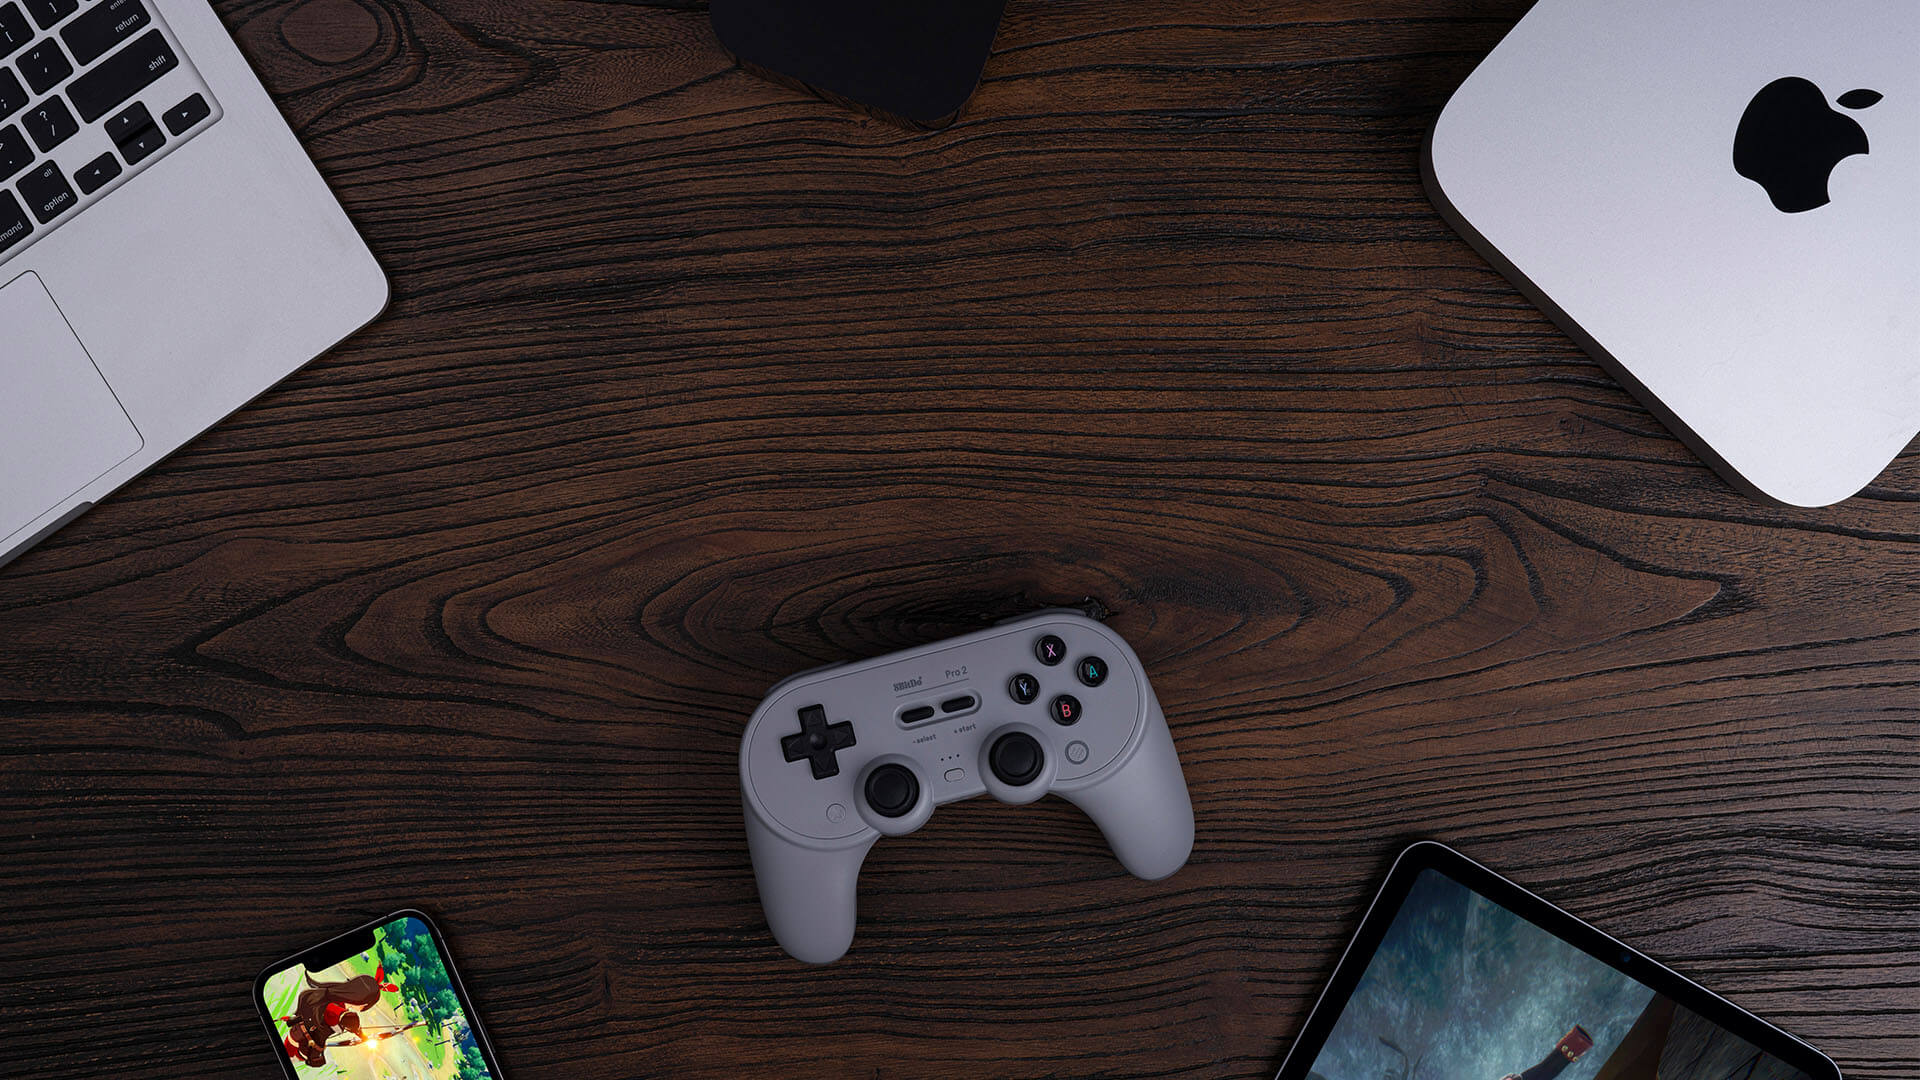 8Bitdo Sn30 Pro Bluetooth Controller for Switch/Switch OLED, PC, macOS,  Android, Steam Deck & Raspberry Pi (Gray Edition)